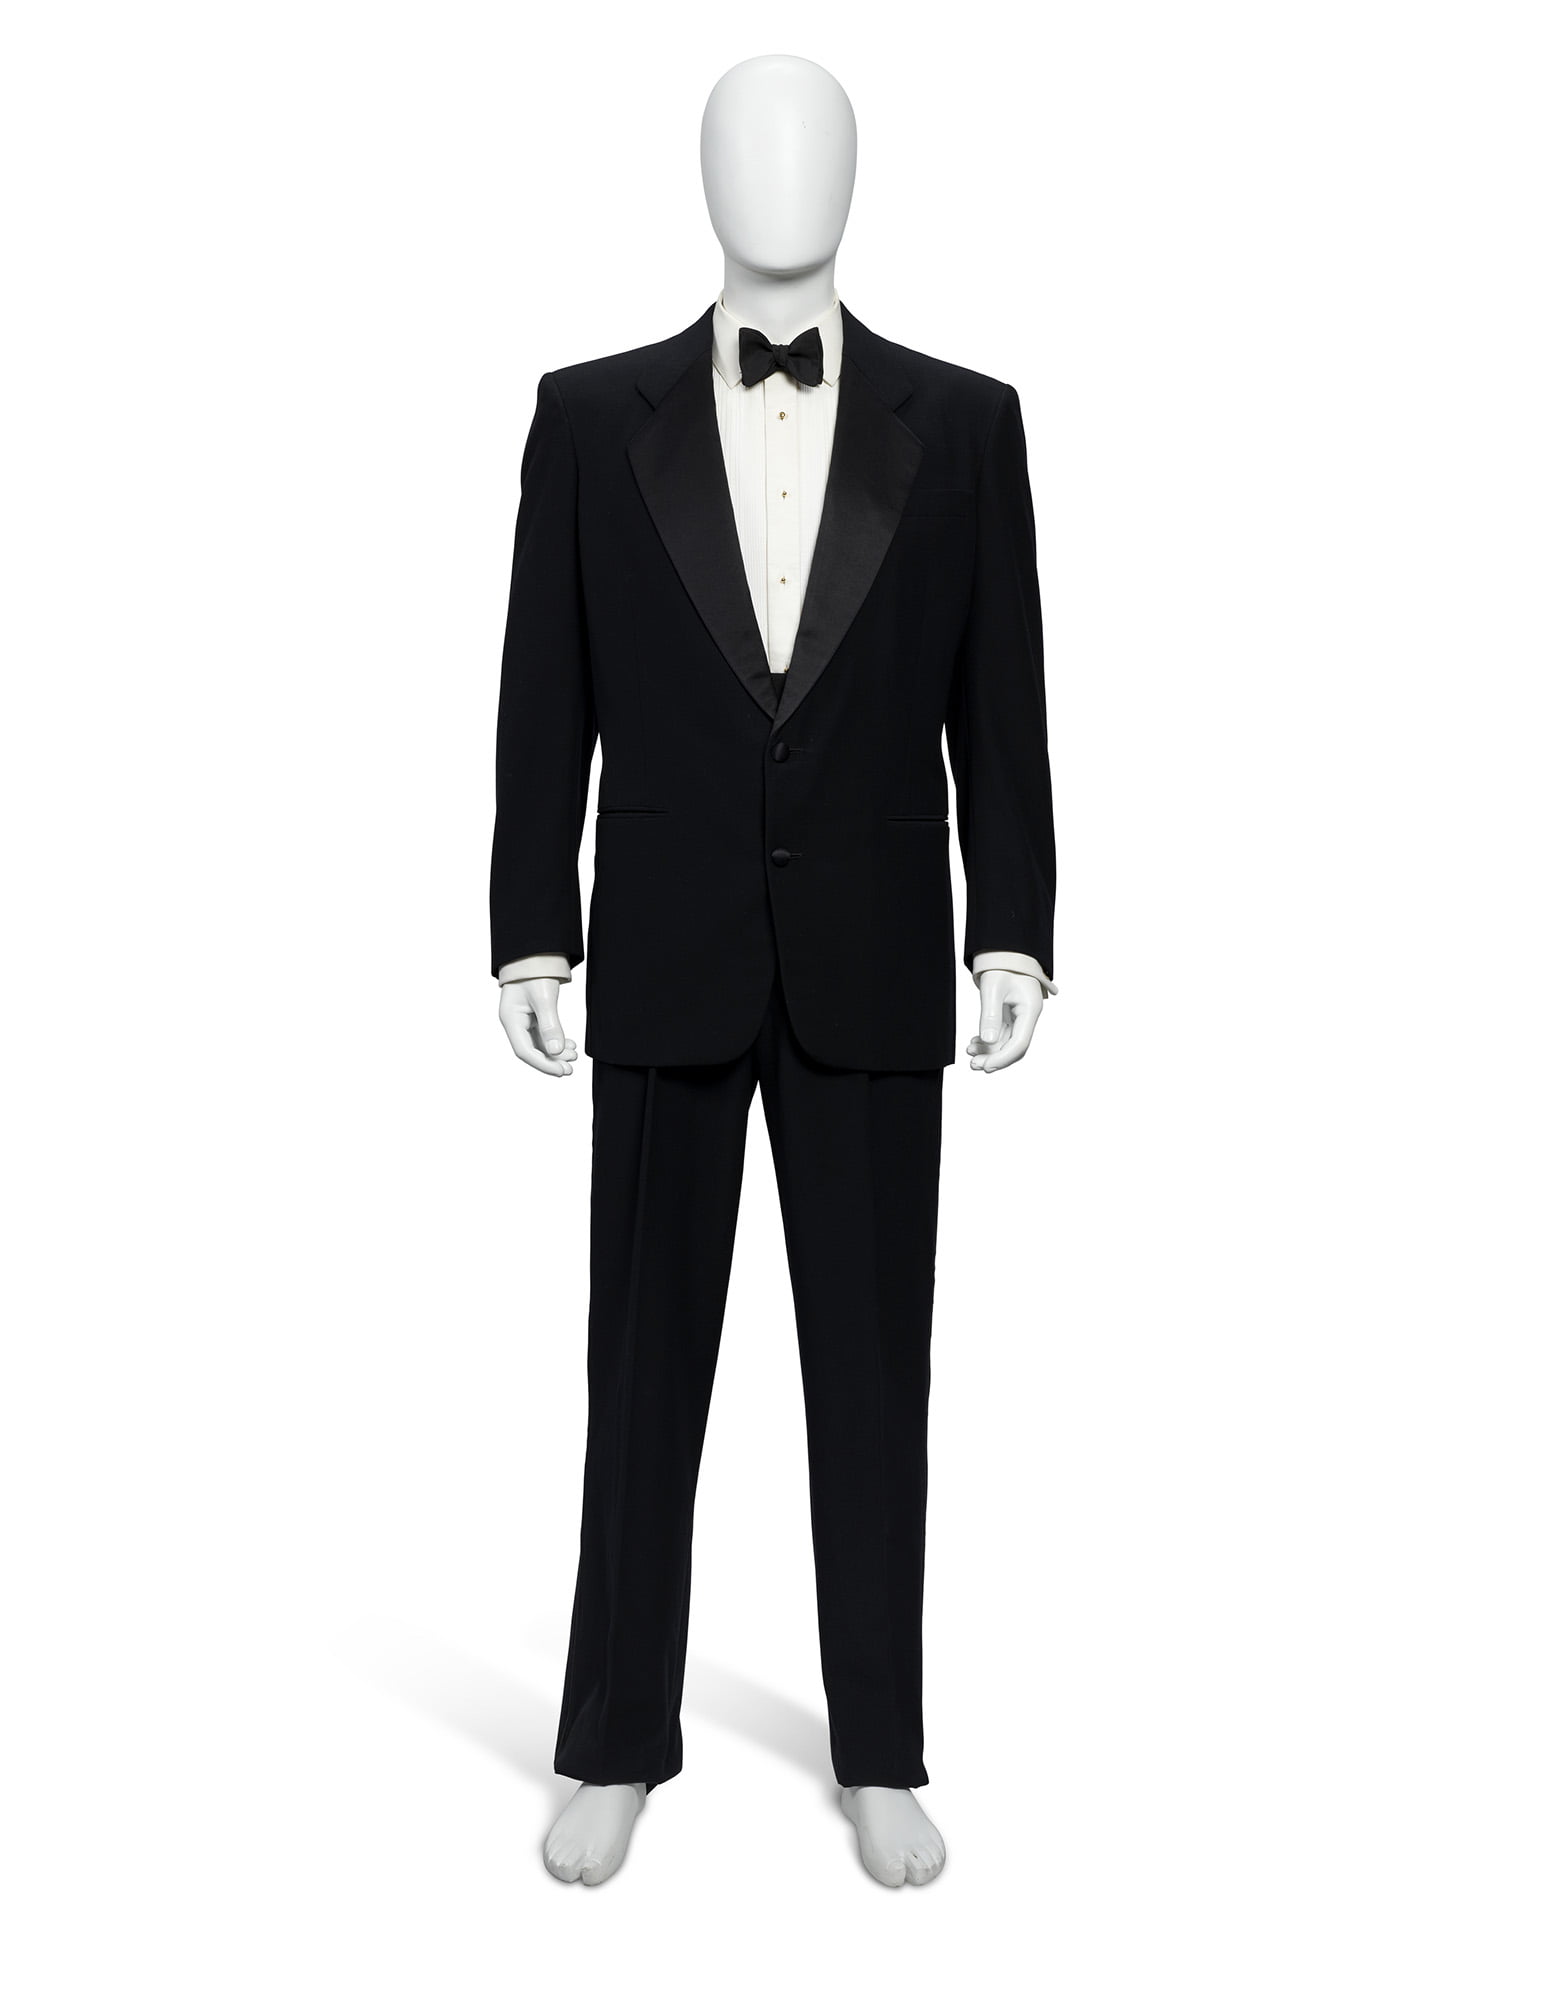 ICENCE TO KILL (1989) A BLACK SINGLE-BREASTED TUXEDO WORN BY TIMOTHY DALTON  AS JAMES BOND AND SIGNED ON INSIDE JACKET LINING